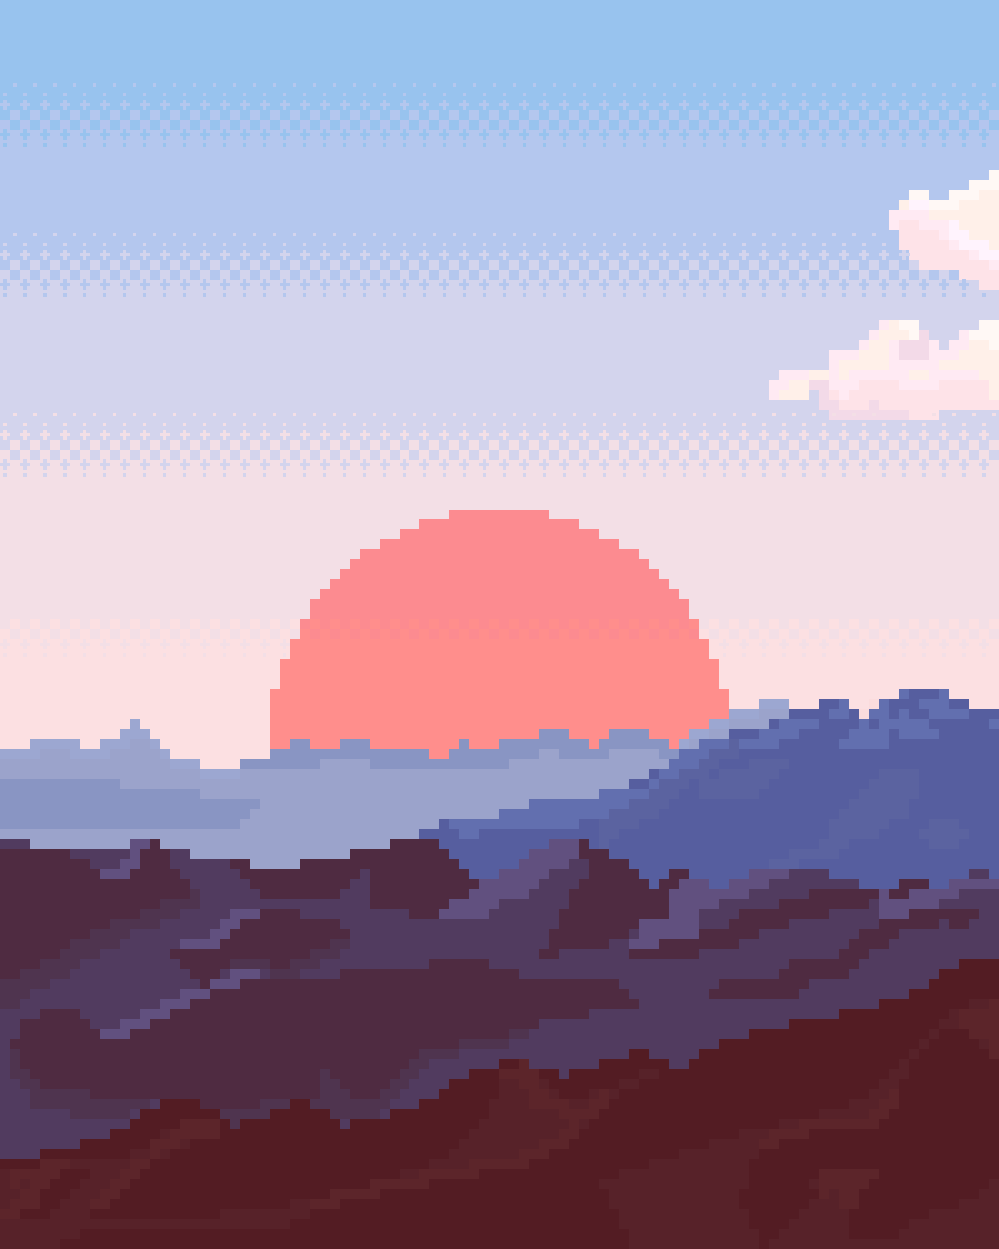 Pixel Wallpaper for your phone